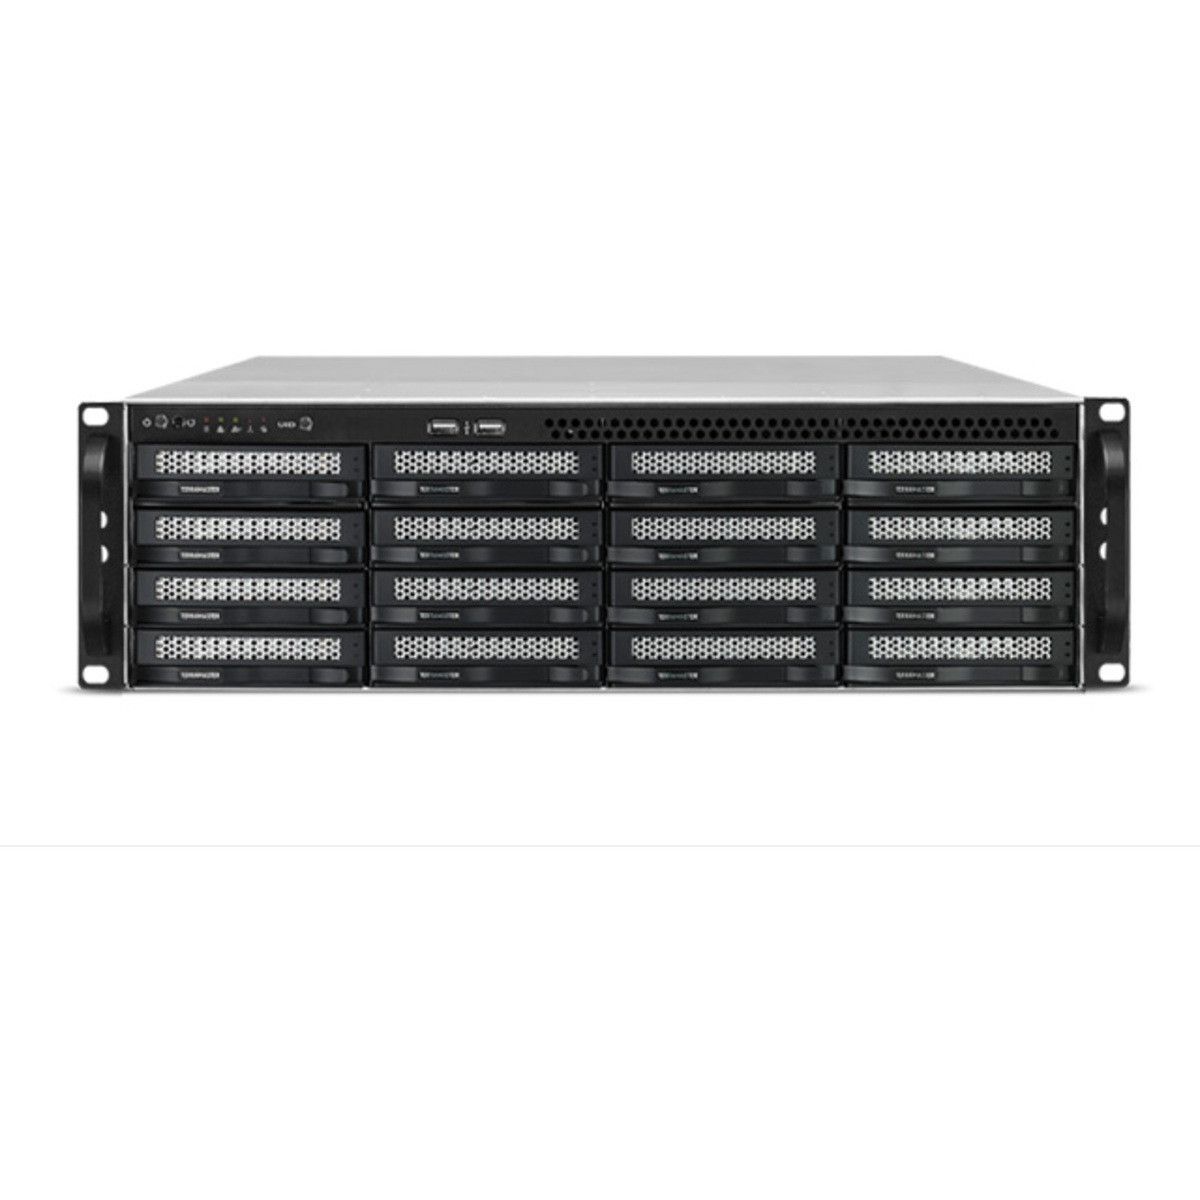 TerraMaster U16-722-2224 100tb 16-Bay RackMount Large Business / Enterprise NAS - Network Attached Storage Device 10x10tb Seagate EXOS X18 ST10000NM018G 3.5 7200rpm SATA 6Gb/s HDD ENTERPRISE Class Drives Installed - Burn-In Tested U16-722-2224